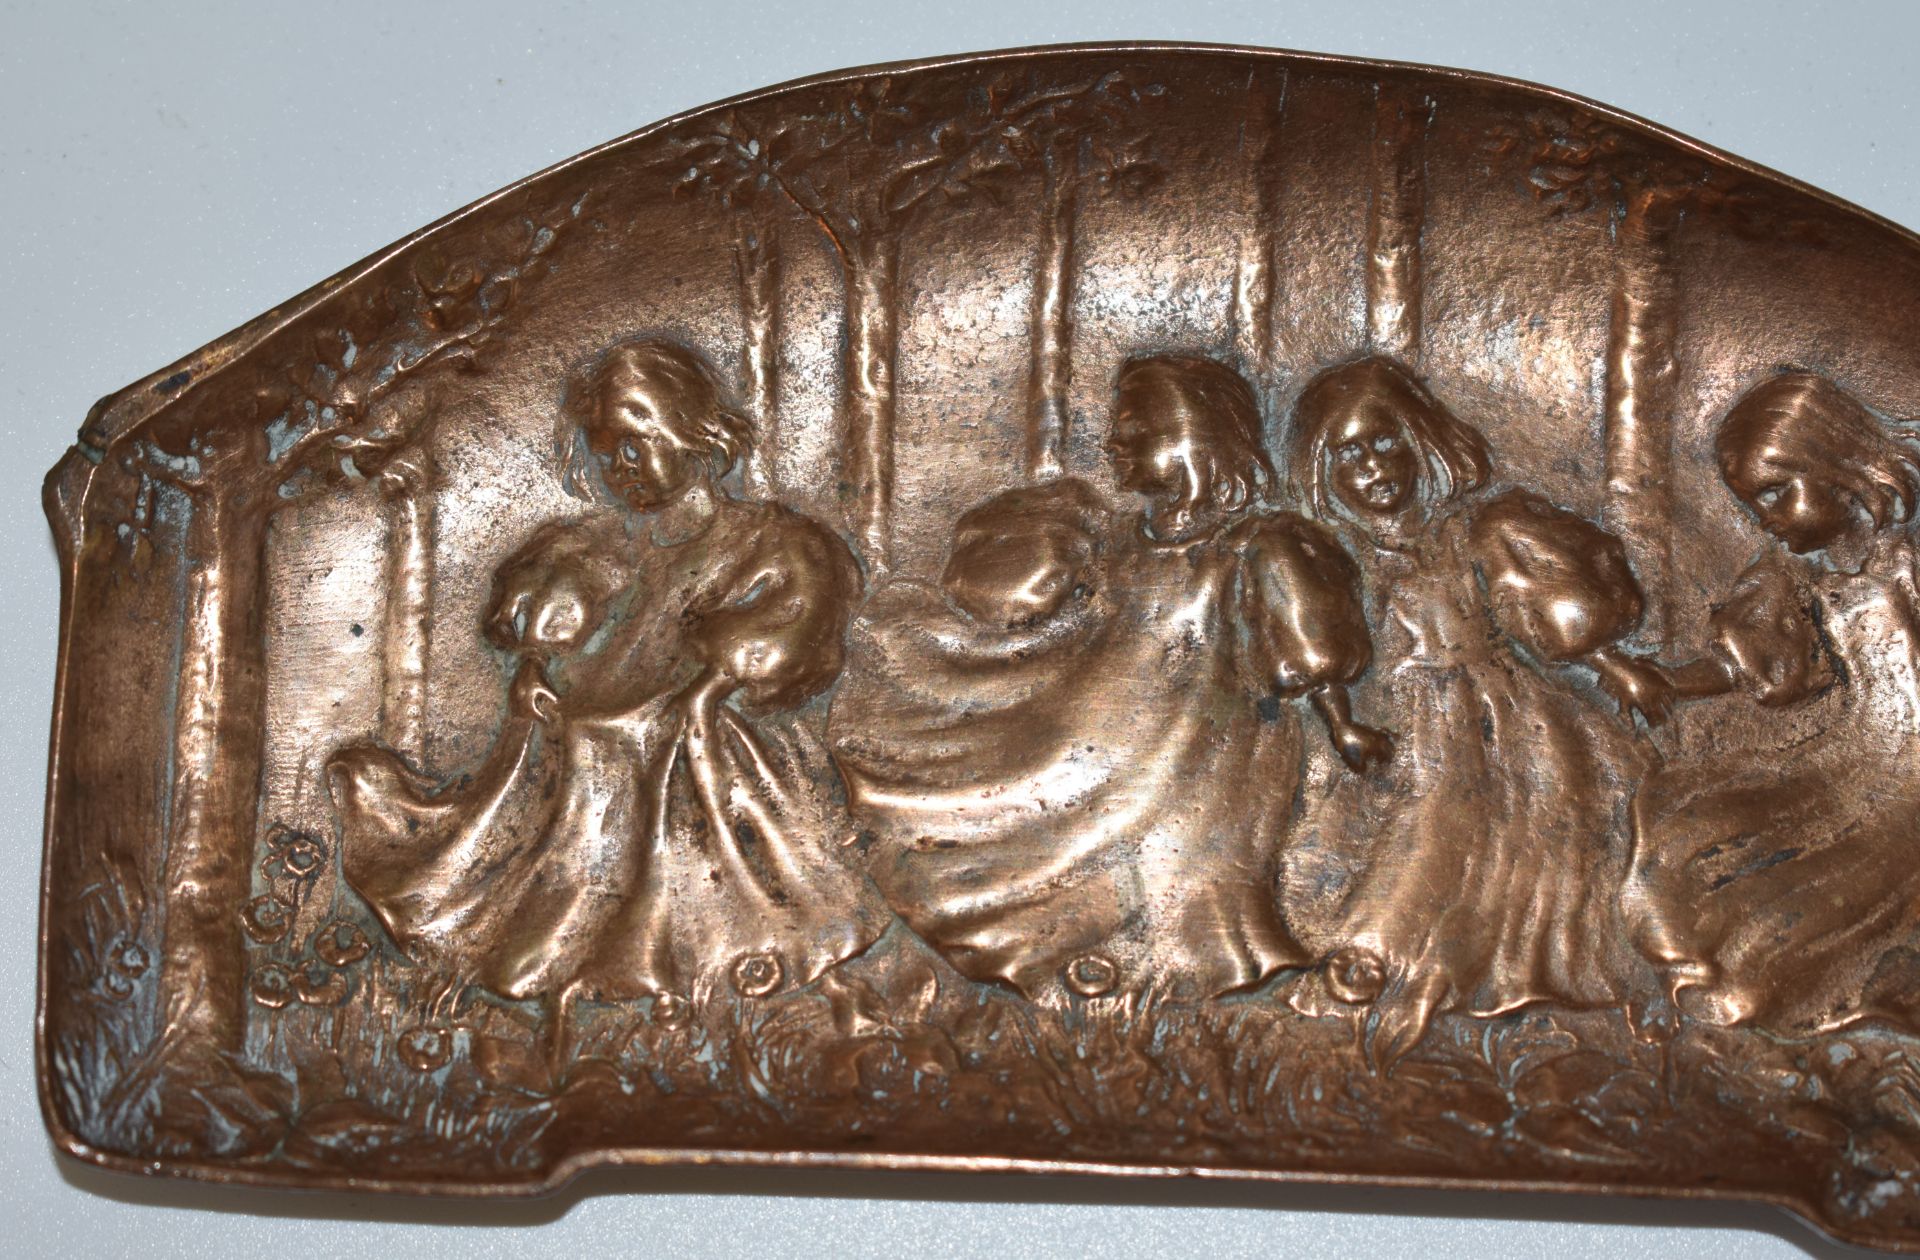 Circa. 1900 pin dish by Arthur Krupp (Austrian1856 -1938) Depicting a group of young girls dancing - Image 4 of 5